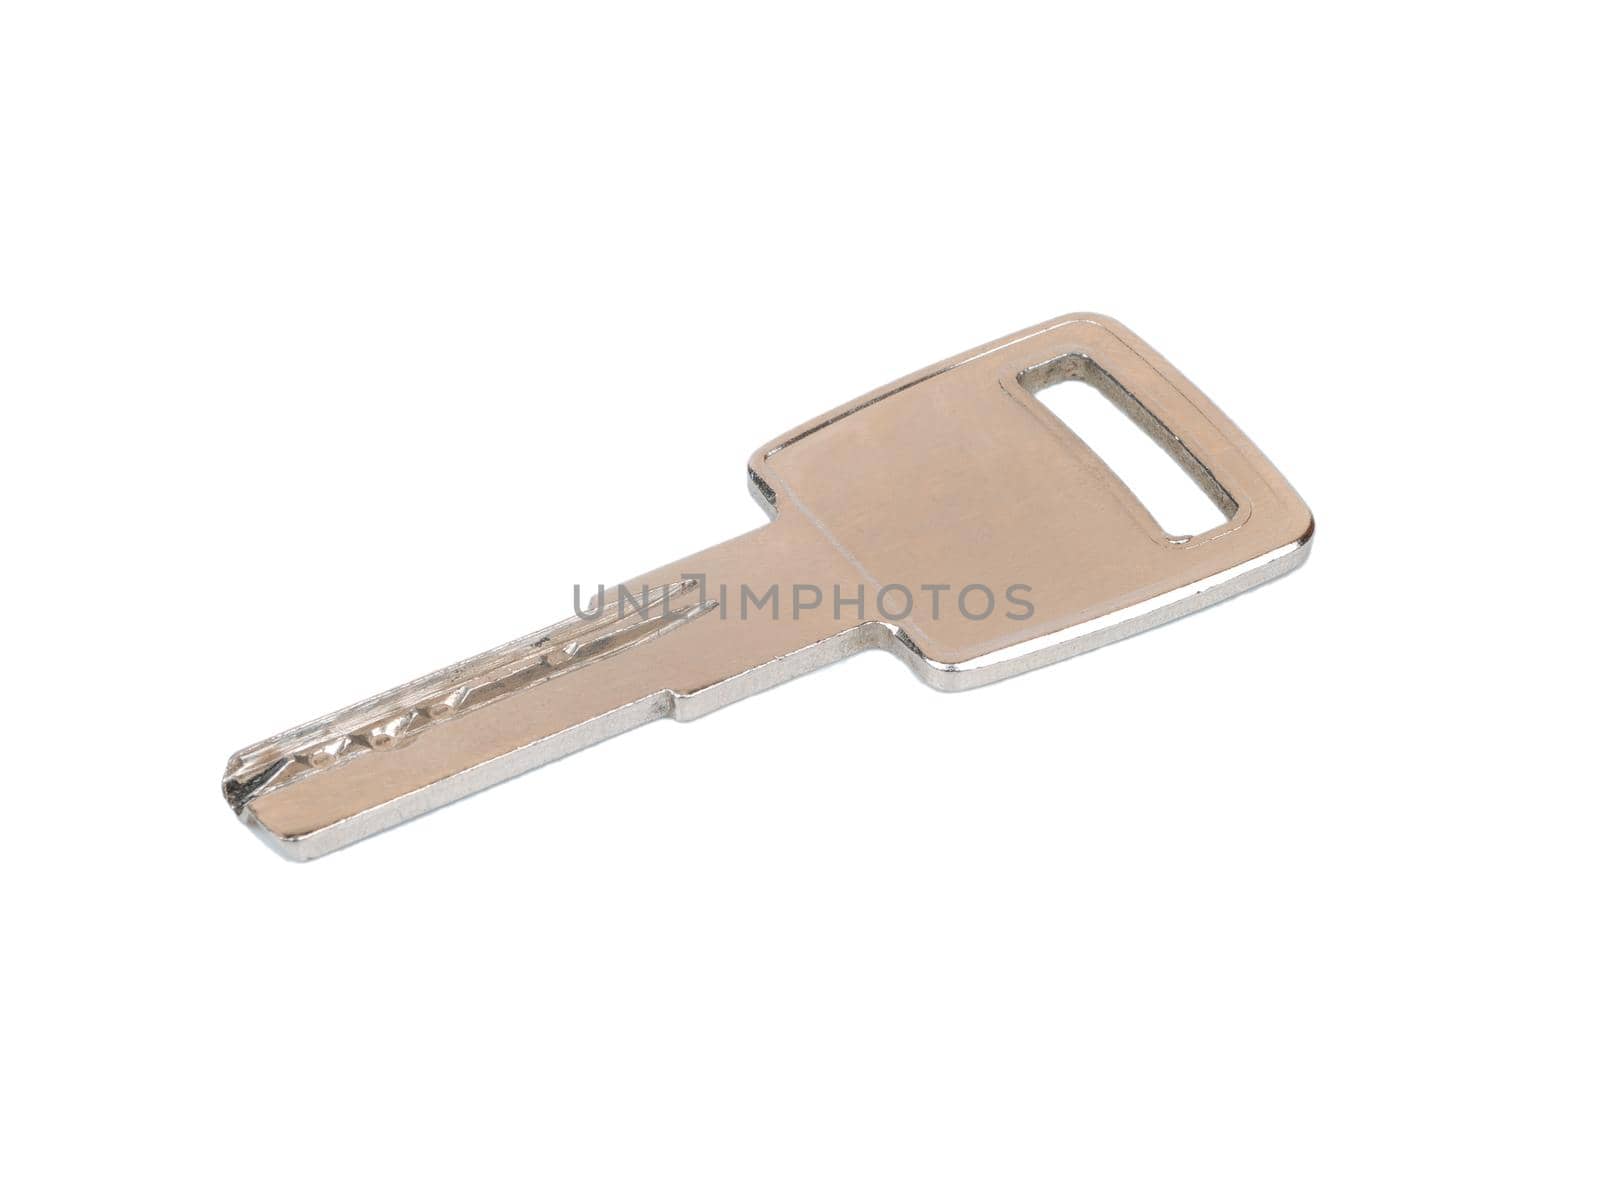 Metal door key isolated on white background